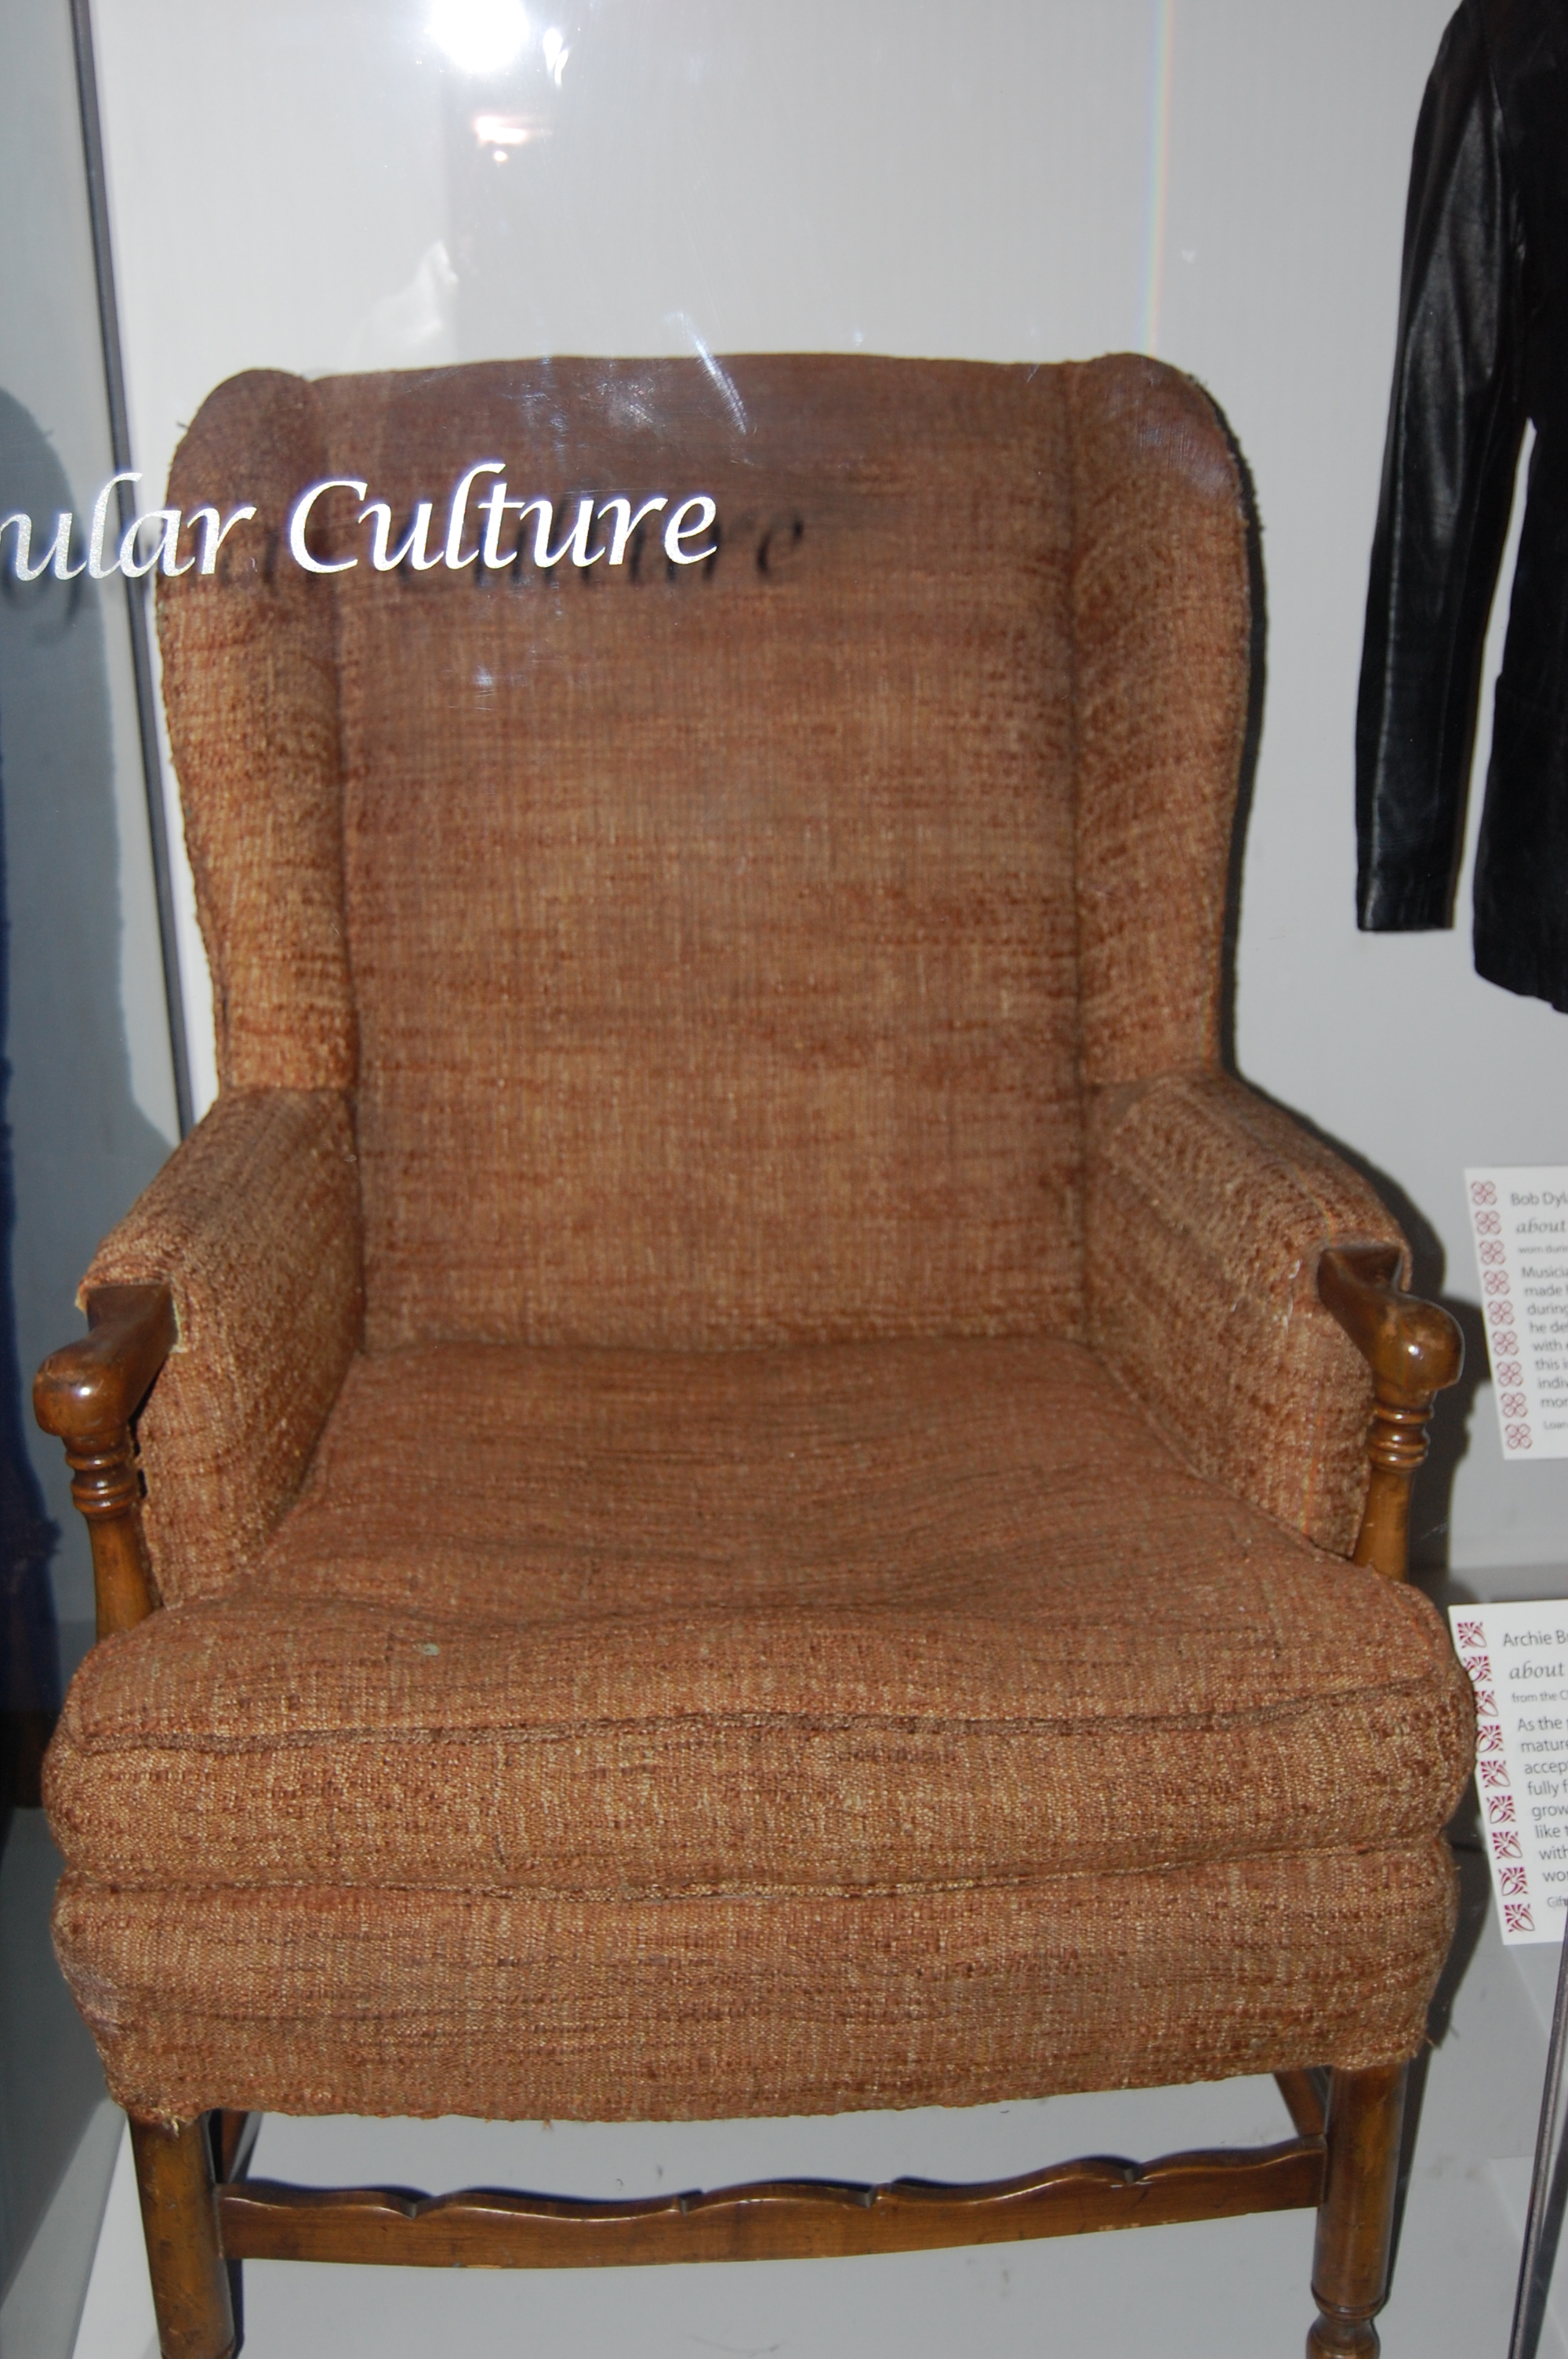 Archie Bunker's chair